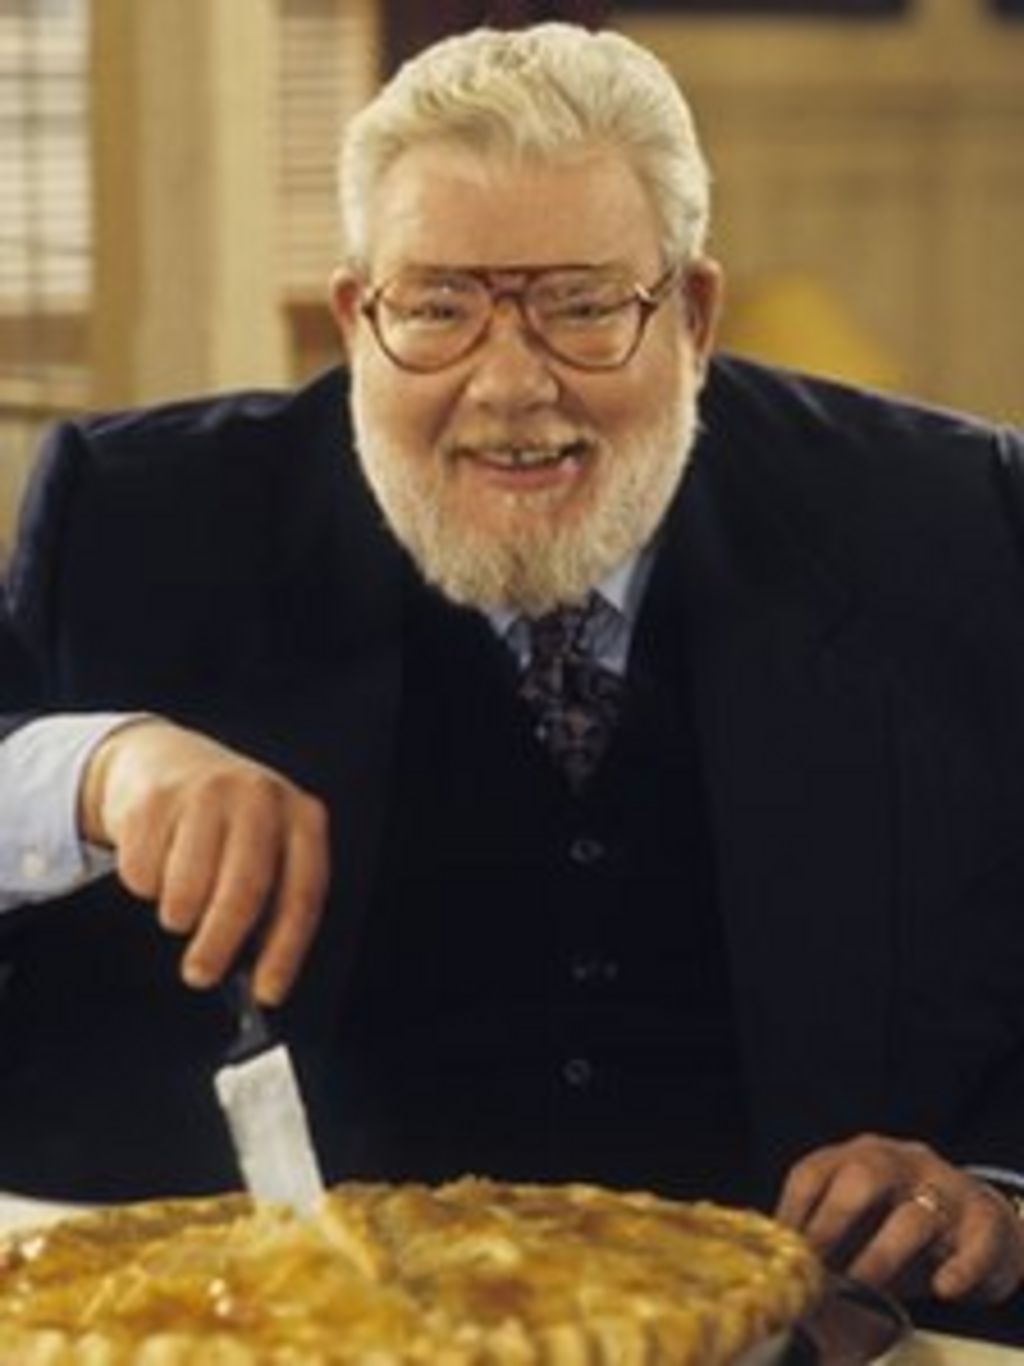 Richard griffiths weight loss